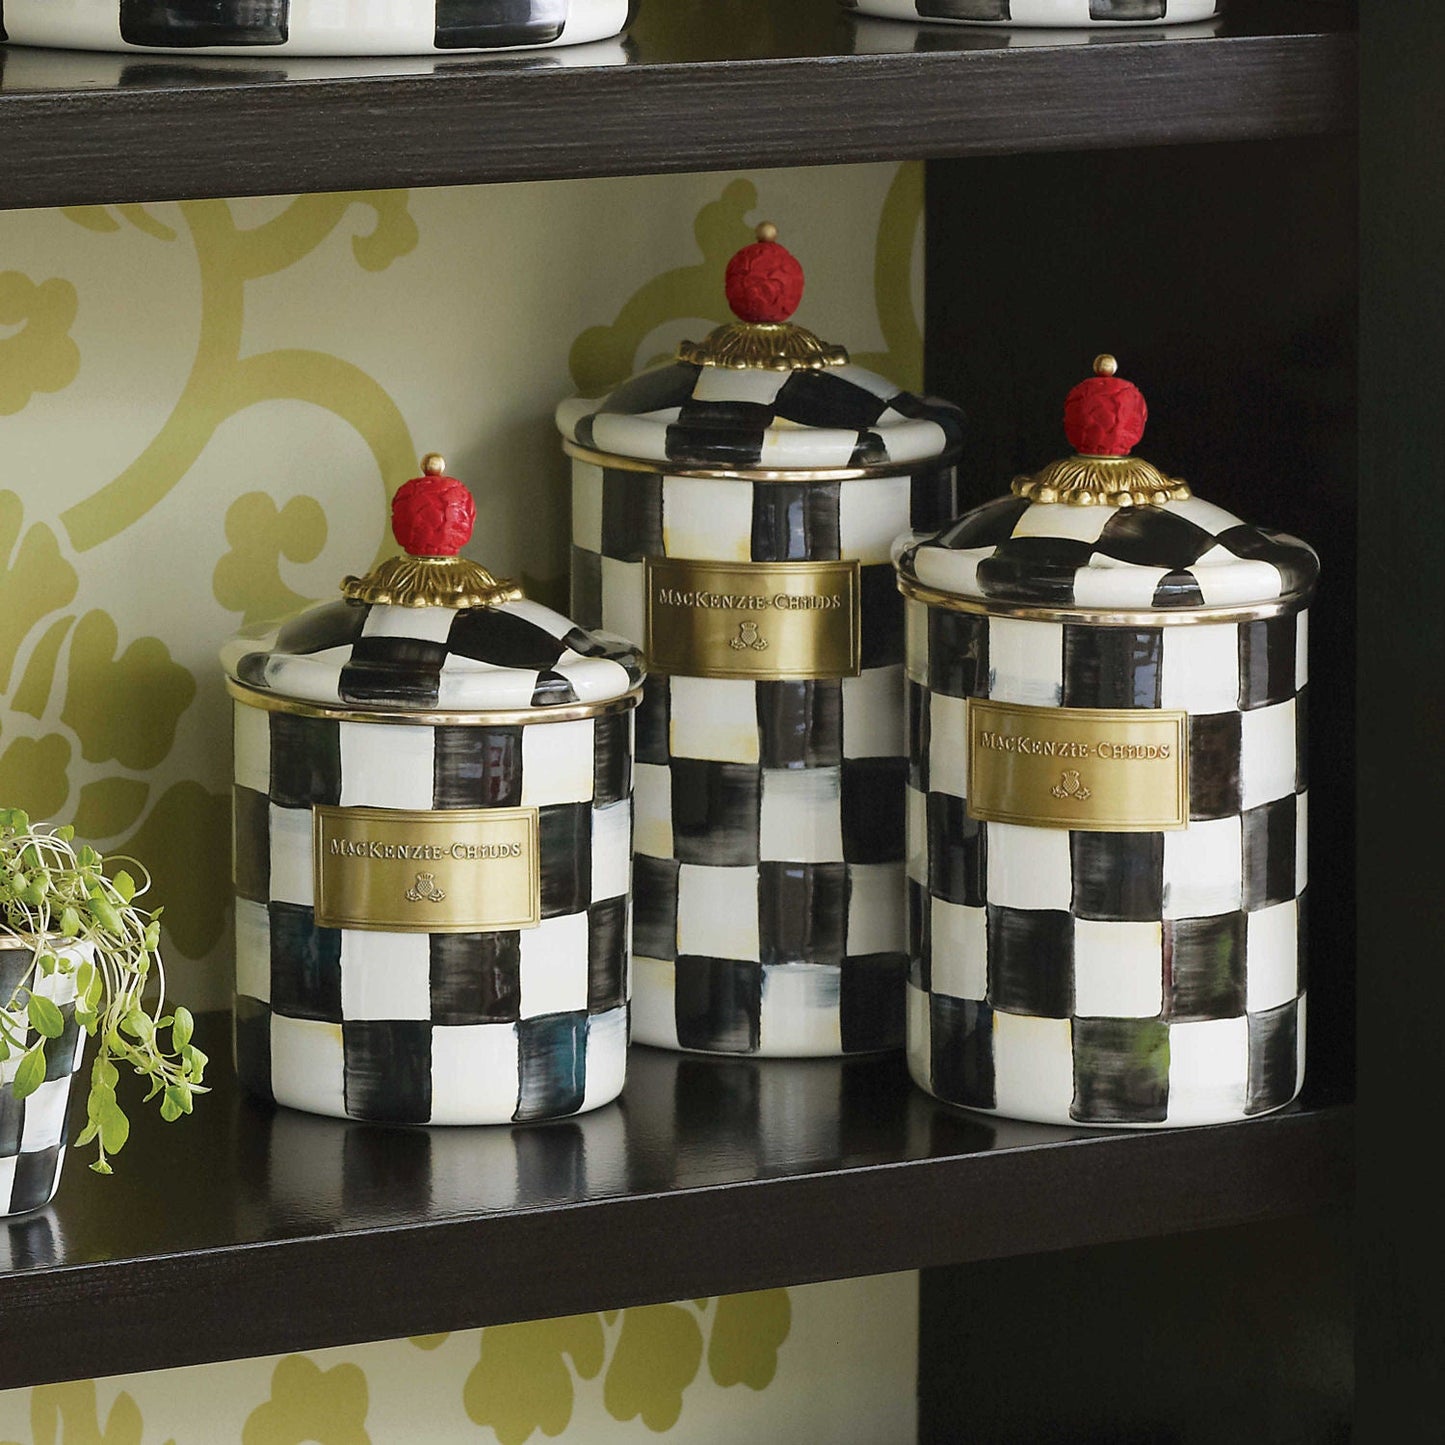 Courtly Check Enamel Canister Large by Mackenzie Childs - |VESIMI Design| Luxury and Rustic bathrooms online